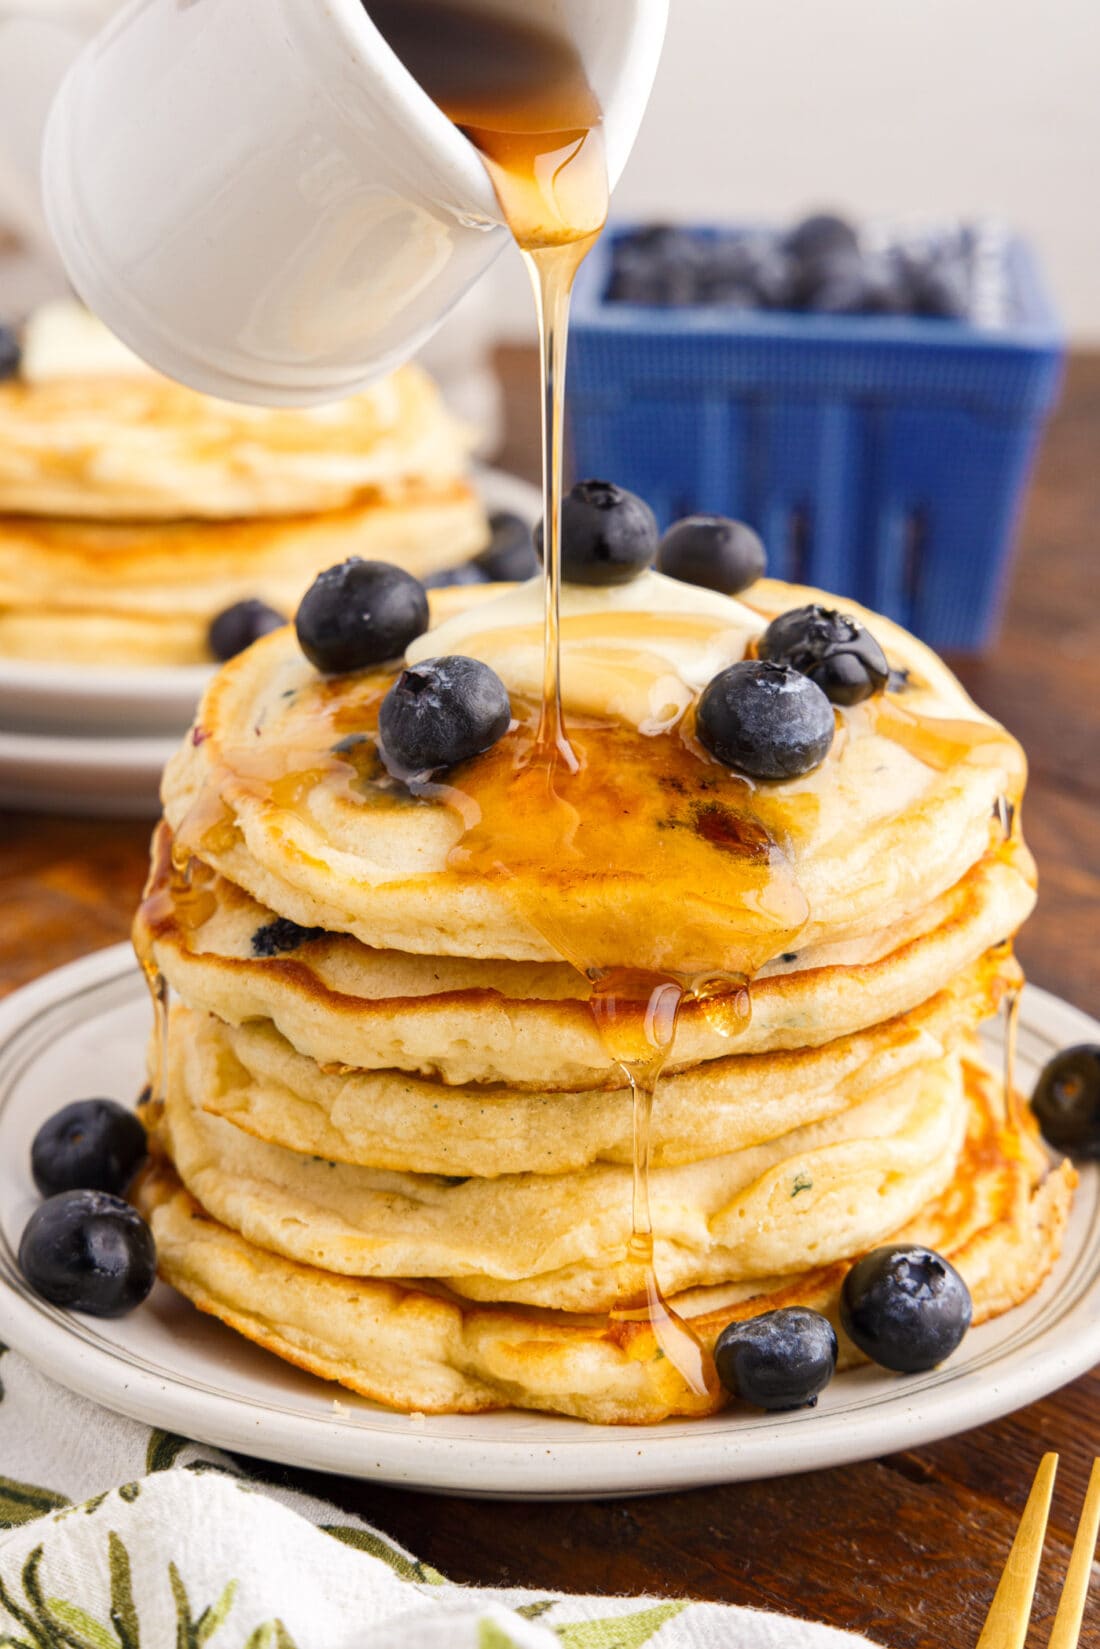 Syrup being poured over a stack of blueberry pancakes